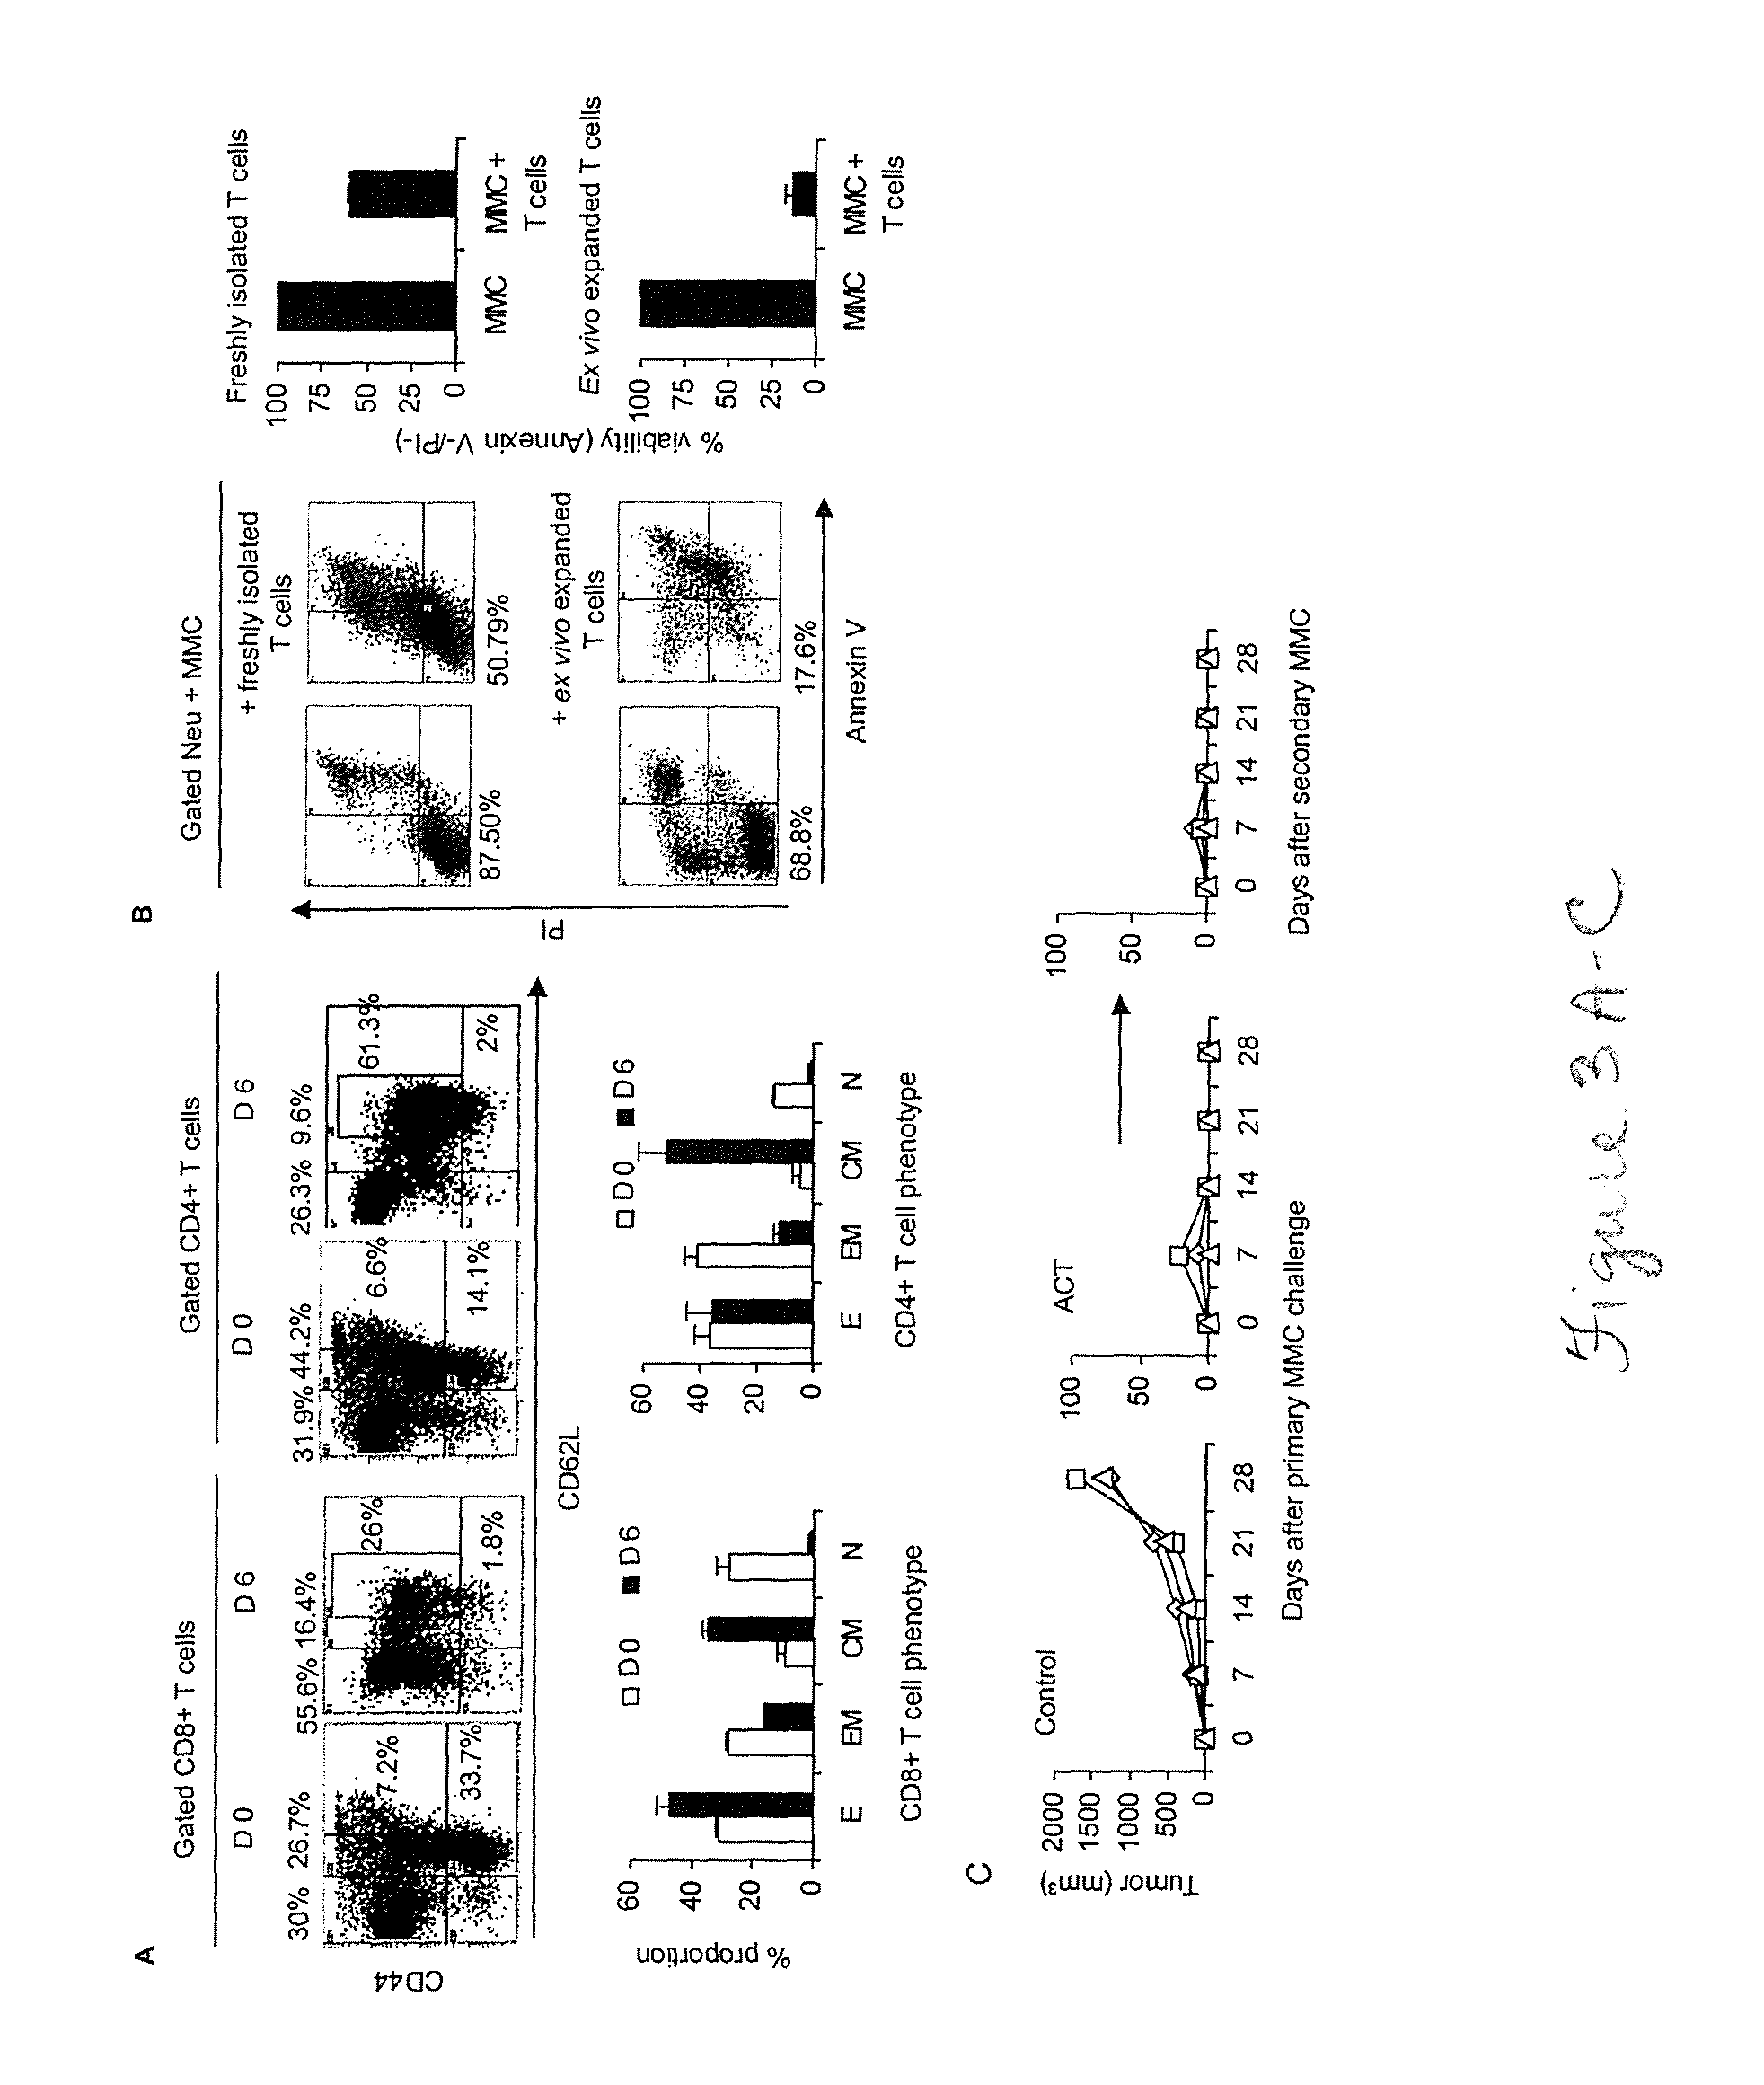 Composition and method for immunological treatment of cancer, prevention of cancer recurrence and metastasis, and overcoming immune suppresor cells